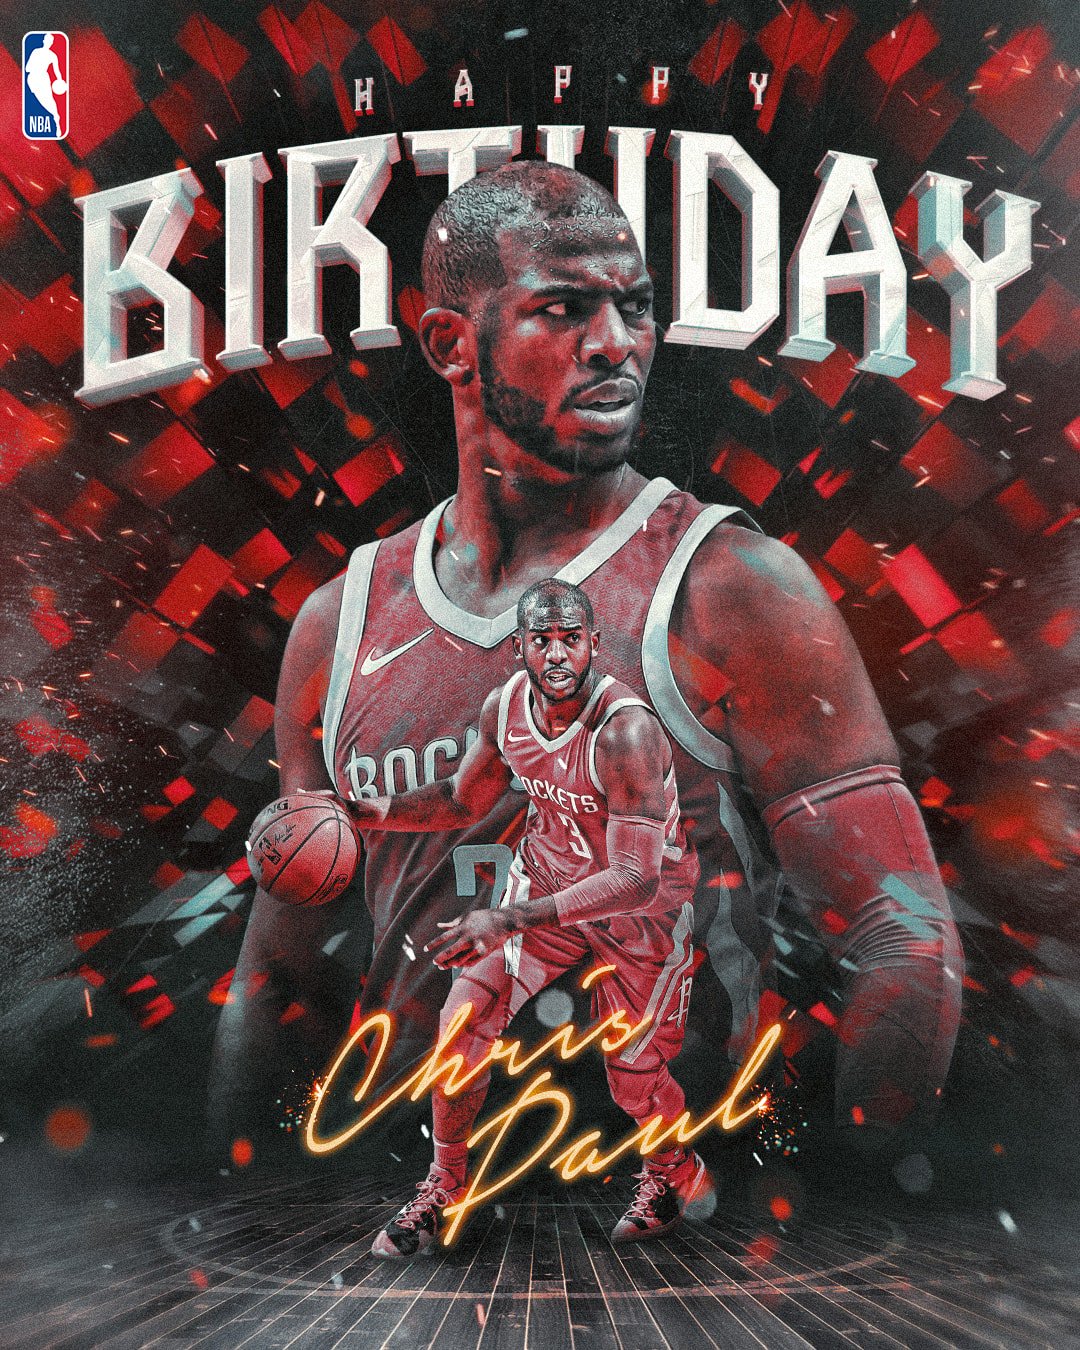 Join us in wishing Chris Paul a Happy Birthday! 